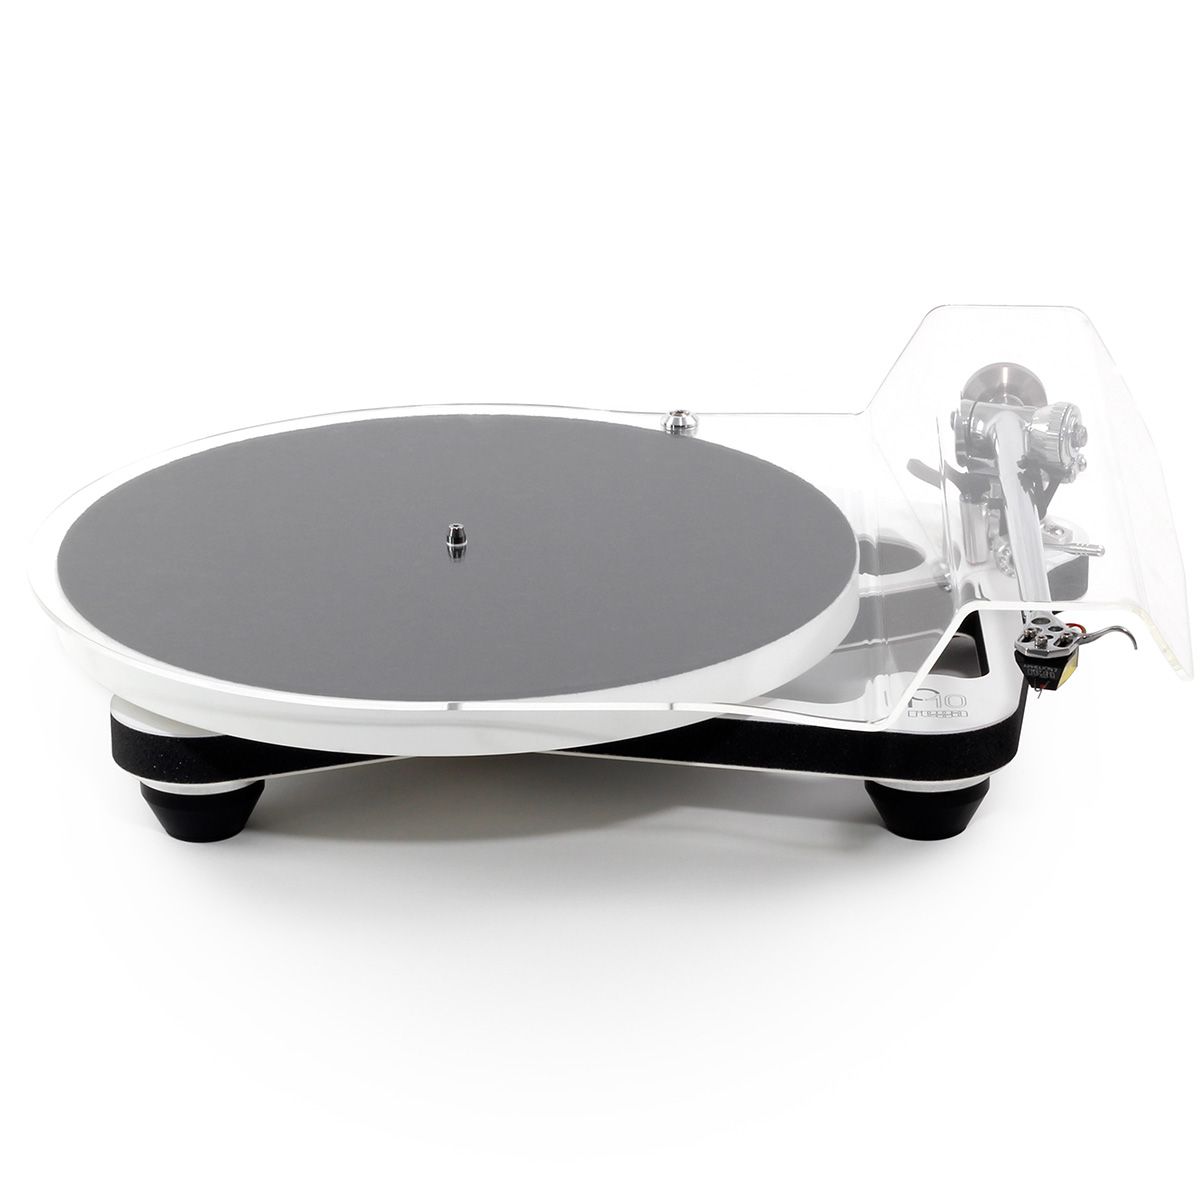 Rega Planar 10 Turntable white front view with dustcover